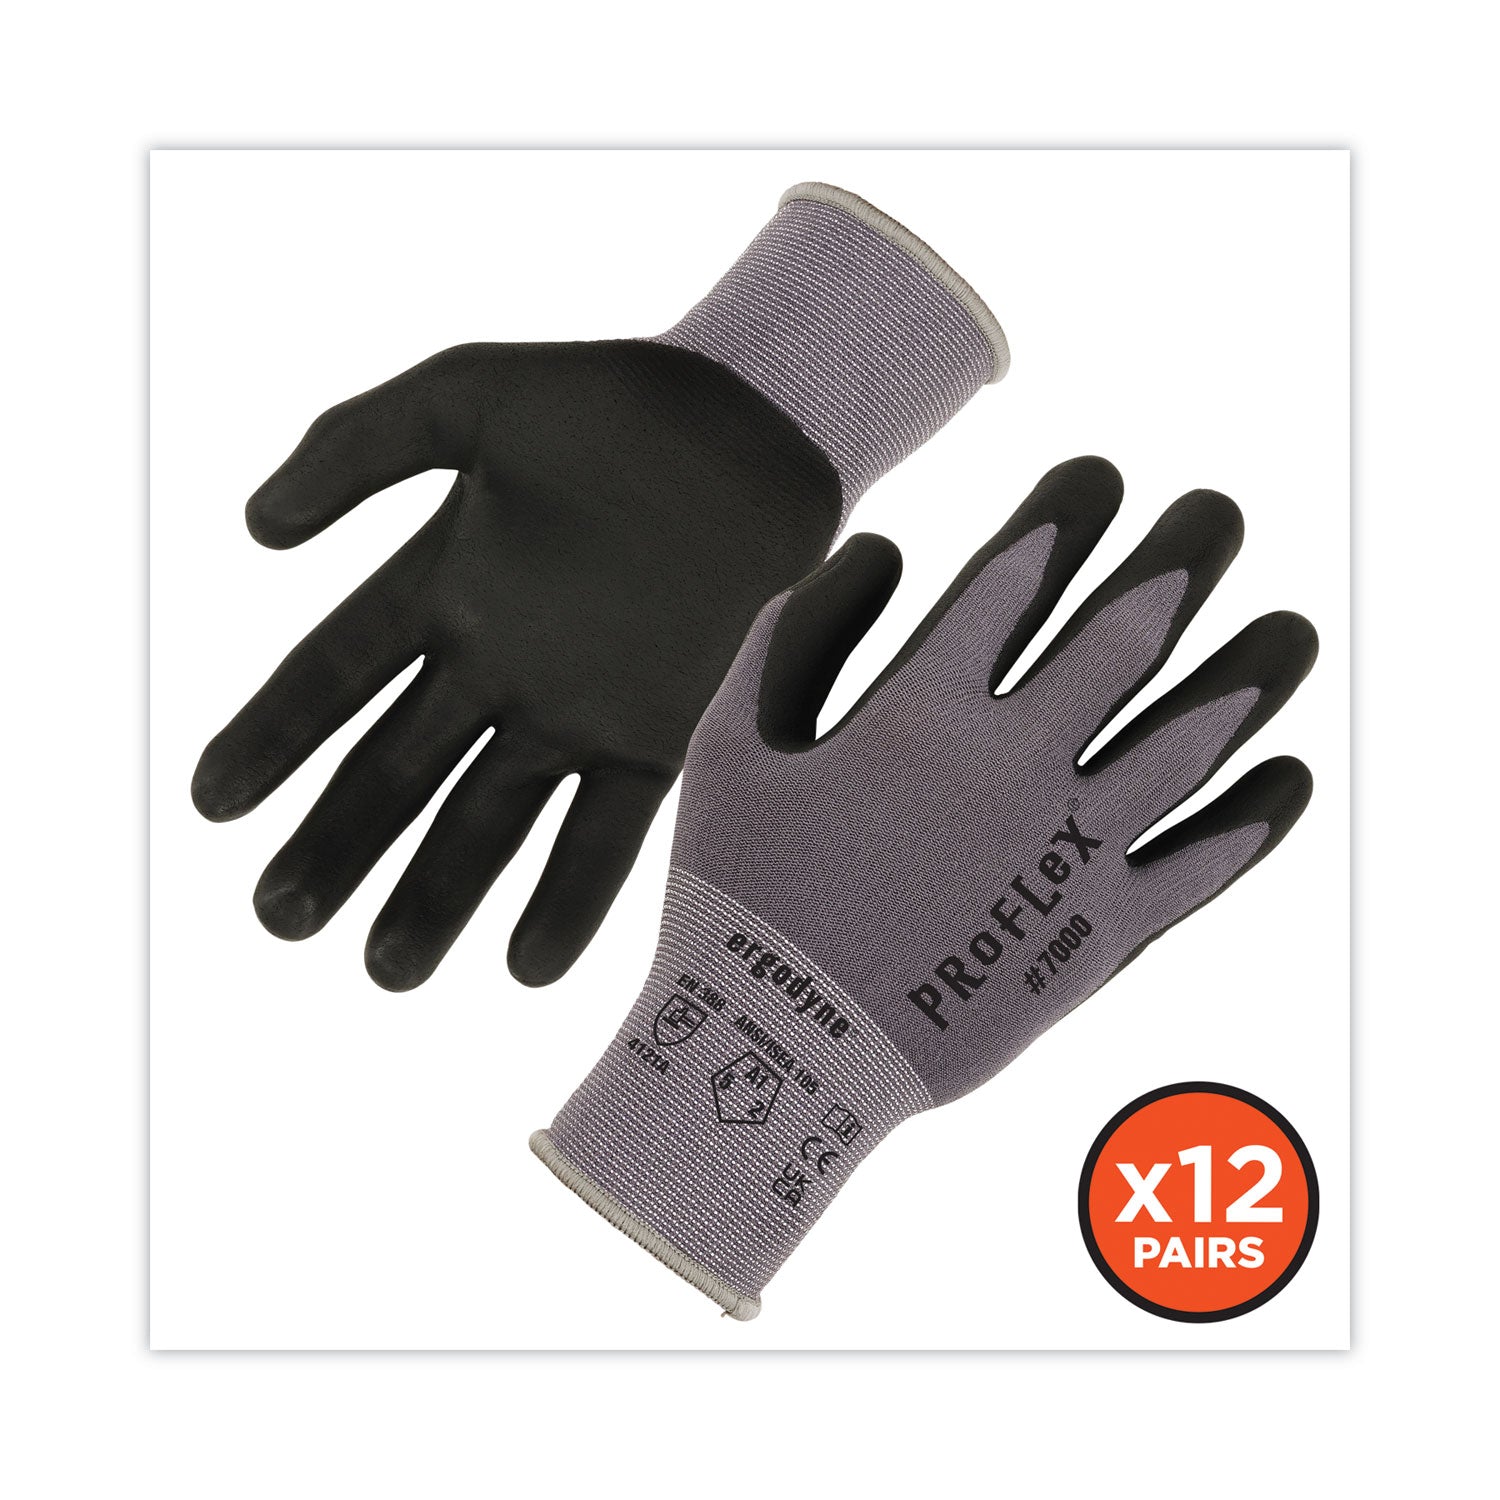 proflex-7000-nitrile-coated-gloves-microfoam-palm-gray-medium-12-pairs-pack-ships-in-1-3-business-days_ego10363 - 2